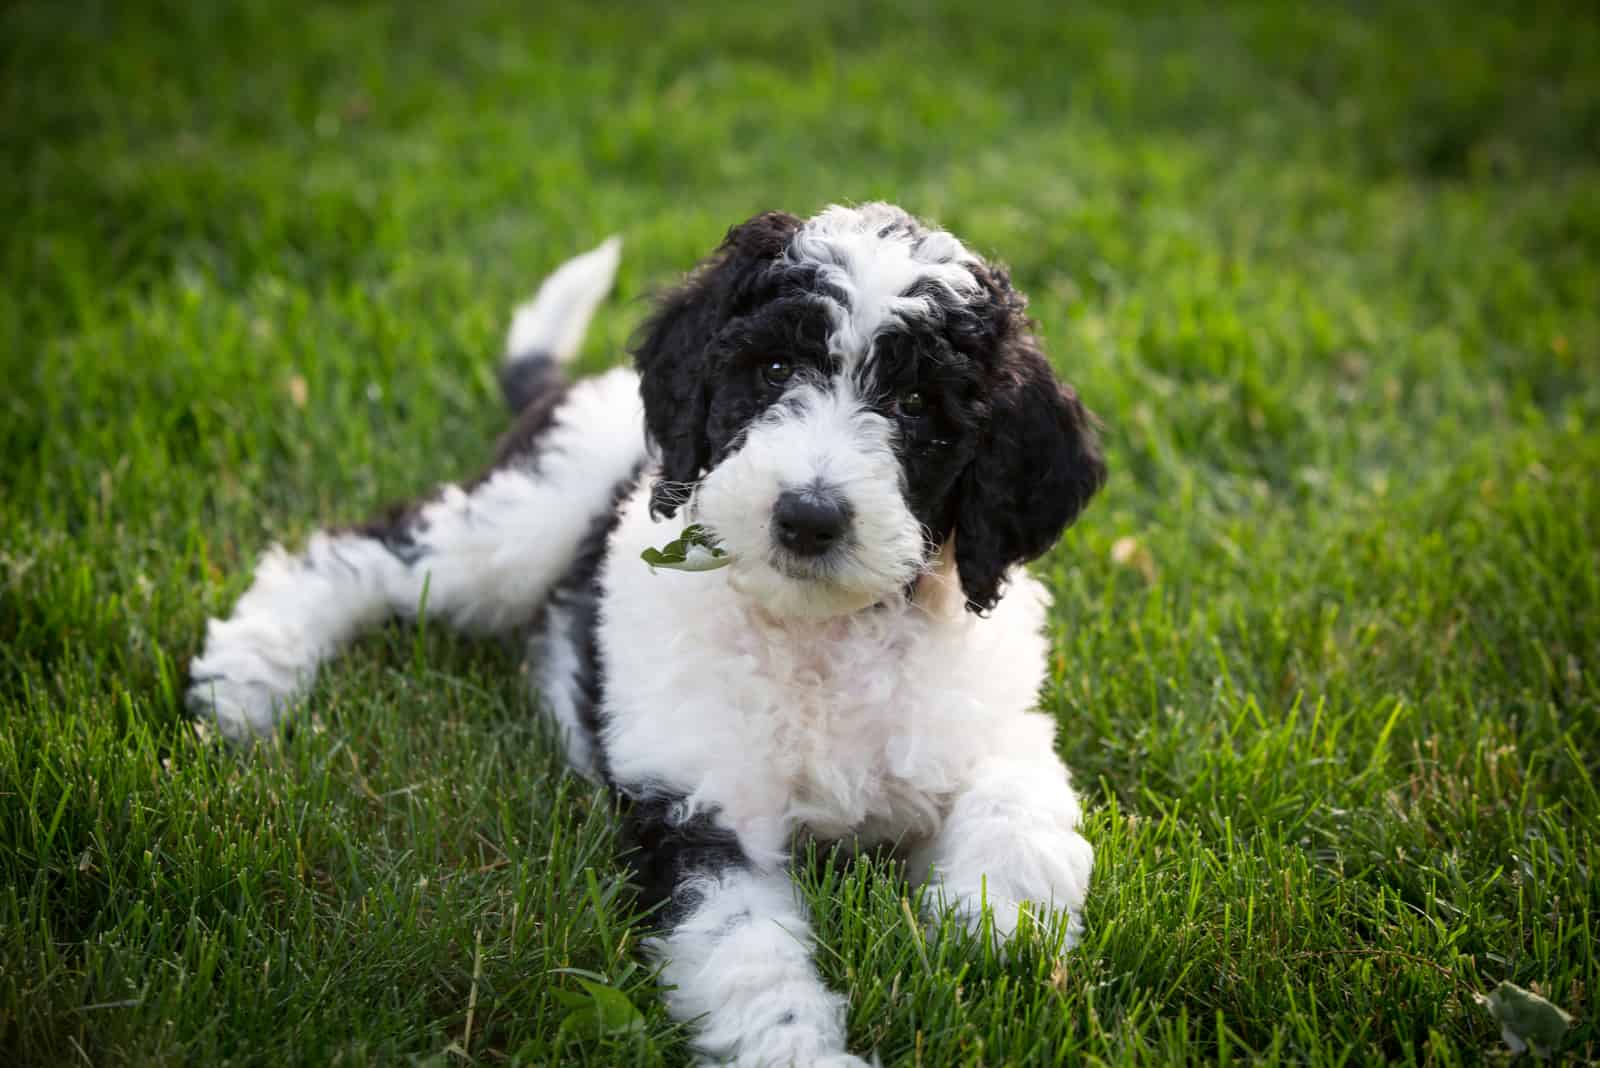 Sheepadoodle puppy lying in the yard